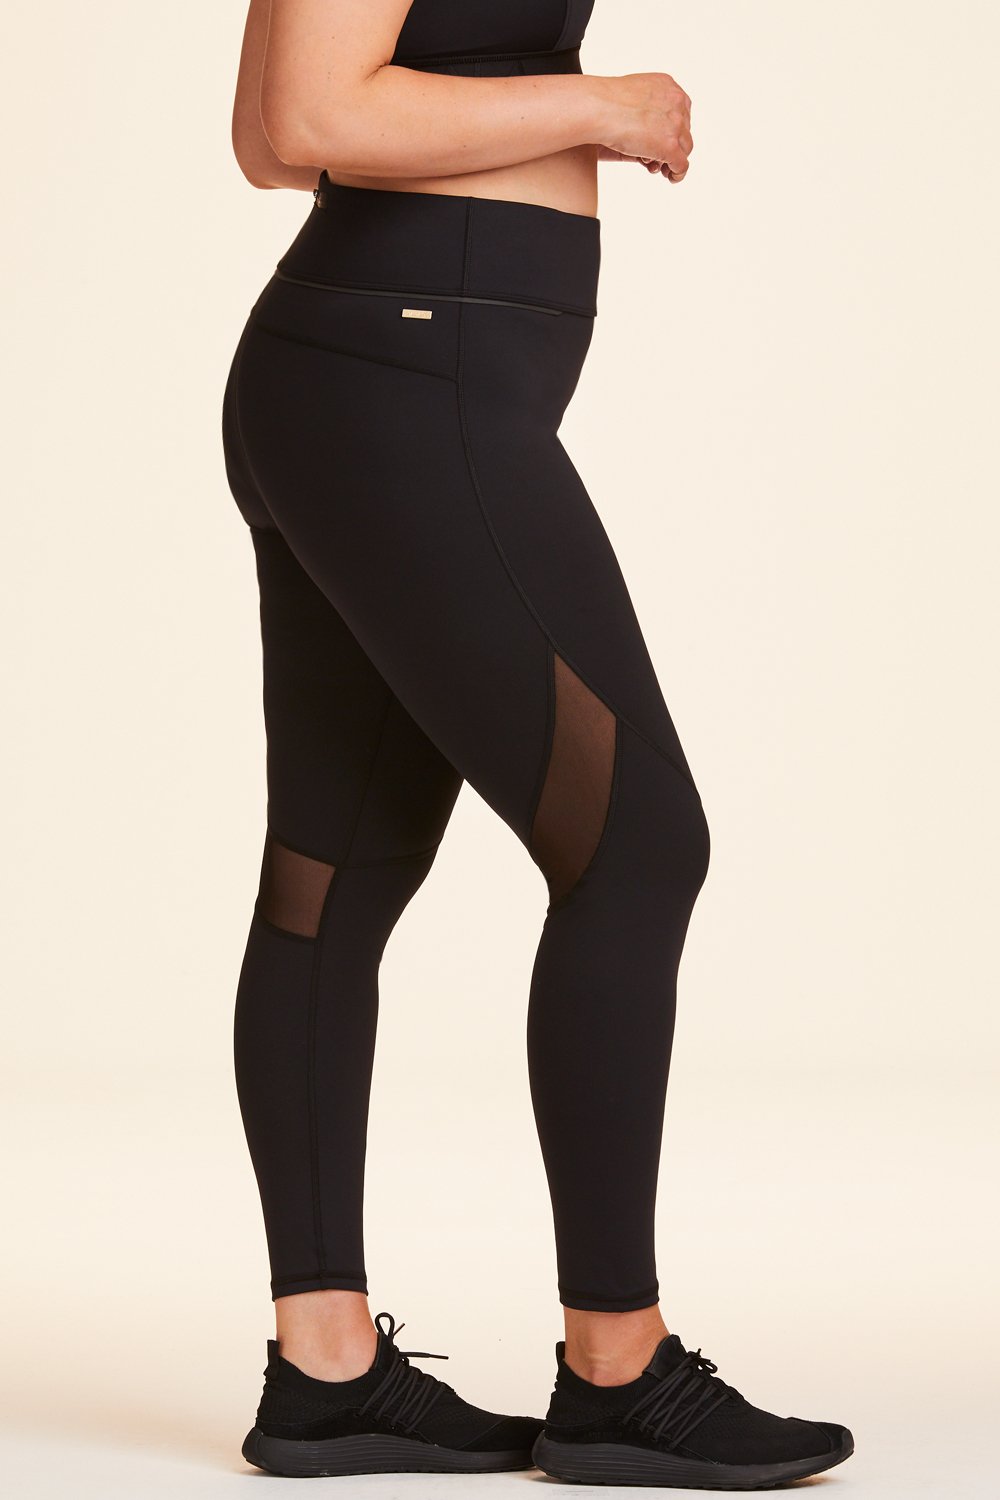 The Best New Activewear Arrivals | January 2022 | POPSUGAR Fitness